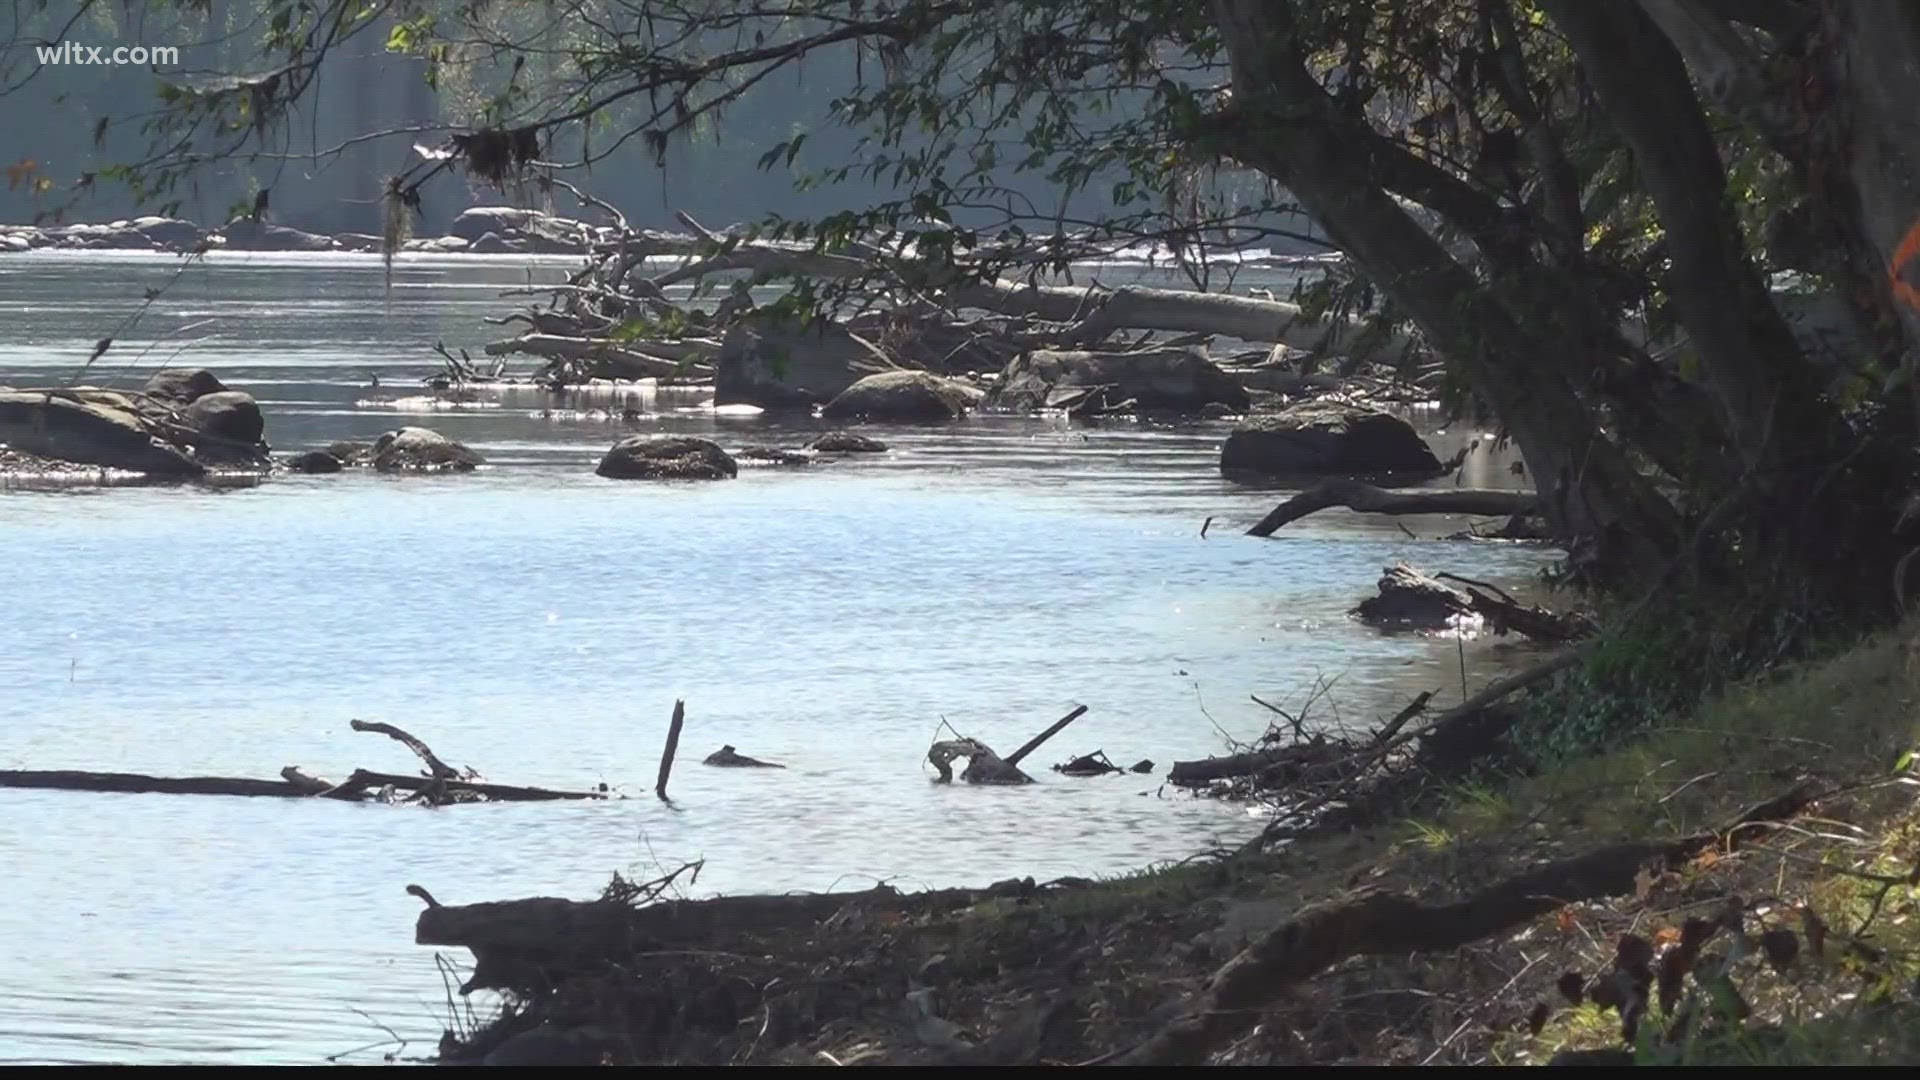 This month has seen some of the lowest levels along the Congaree river in over a decade.